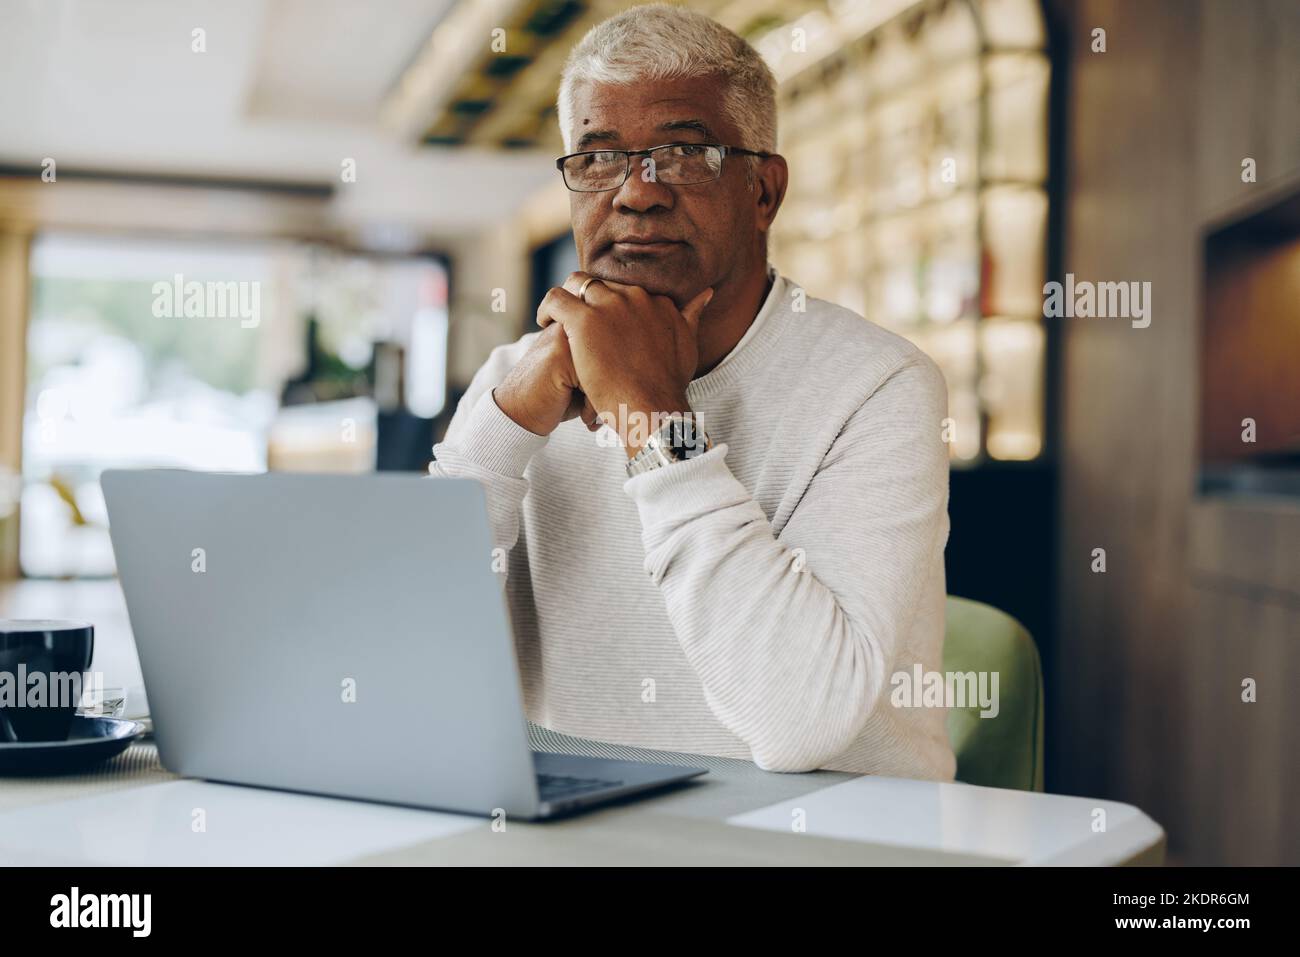 Mature businessman looking at the camera while working in a modern cafe. Senior businessman using a laptop while working remotely. Stock Photo